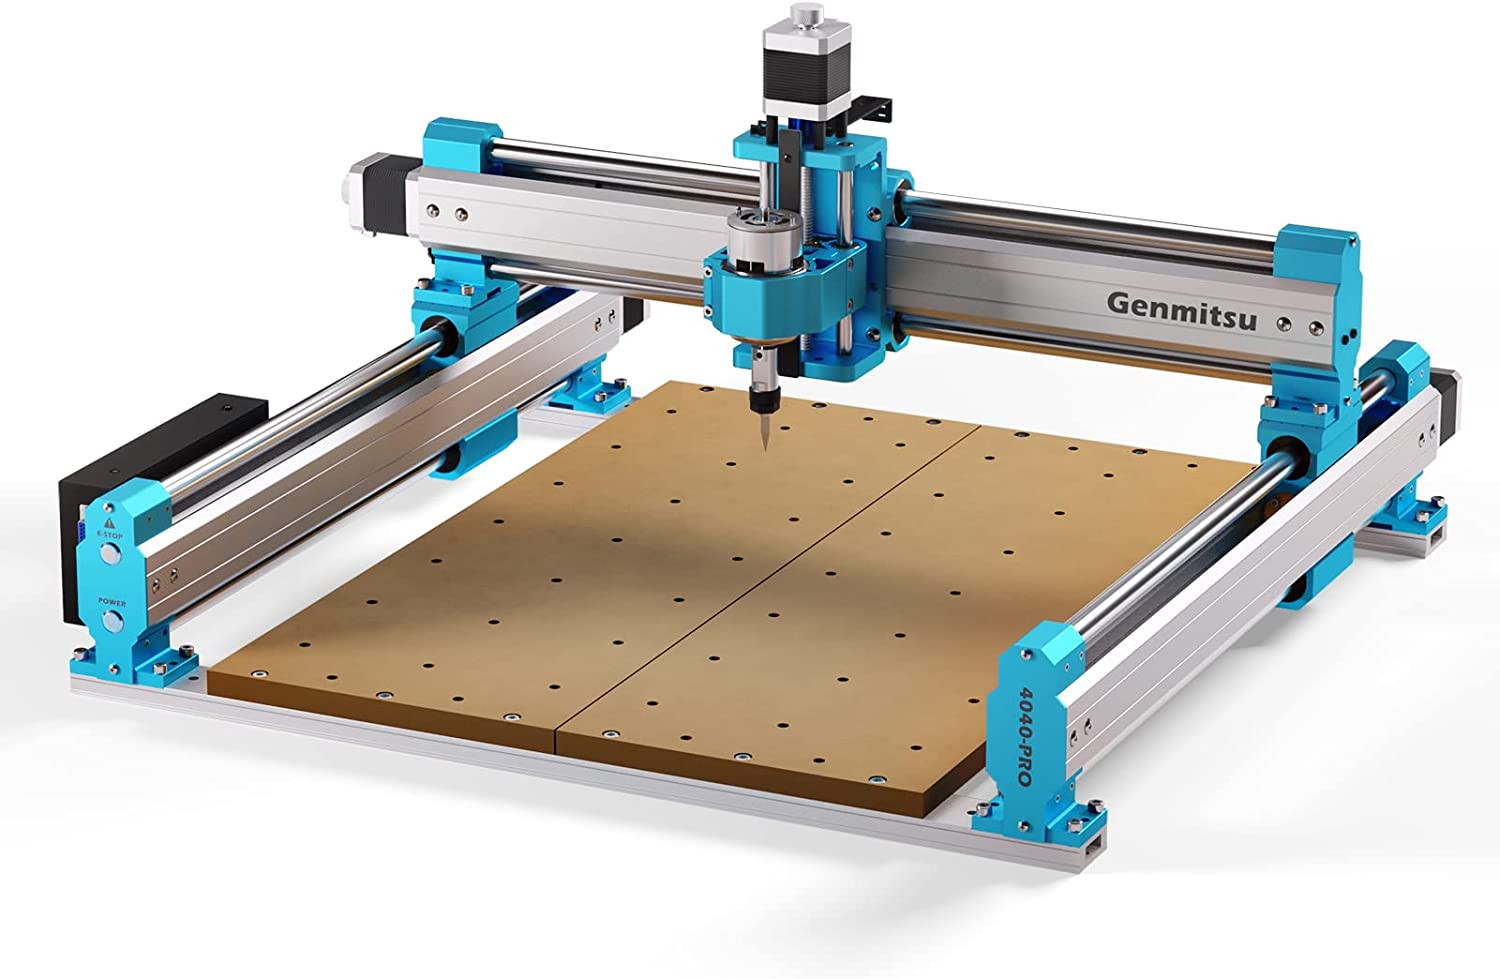 Genmitsu CNC Machine 4040-PRO for Wood Acrylic MDF Nylon Carving Cutting, GRBL Control, 3 Axis CNC Router Machine, Working Area 400 x 400 x 78mm (15.7